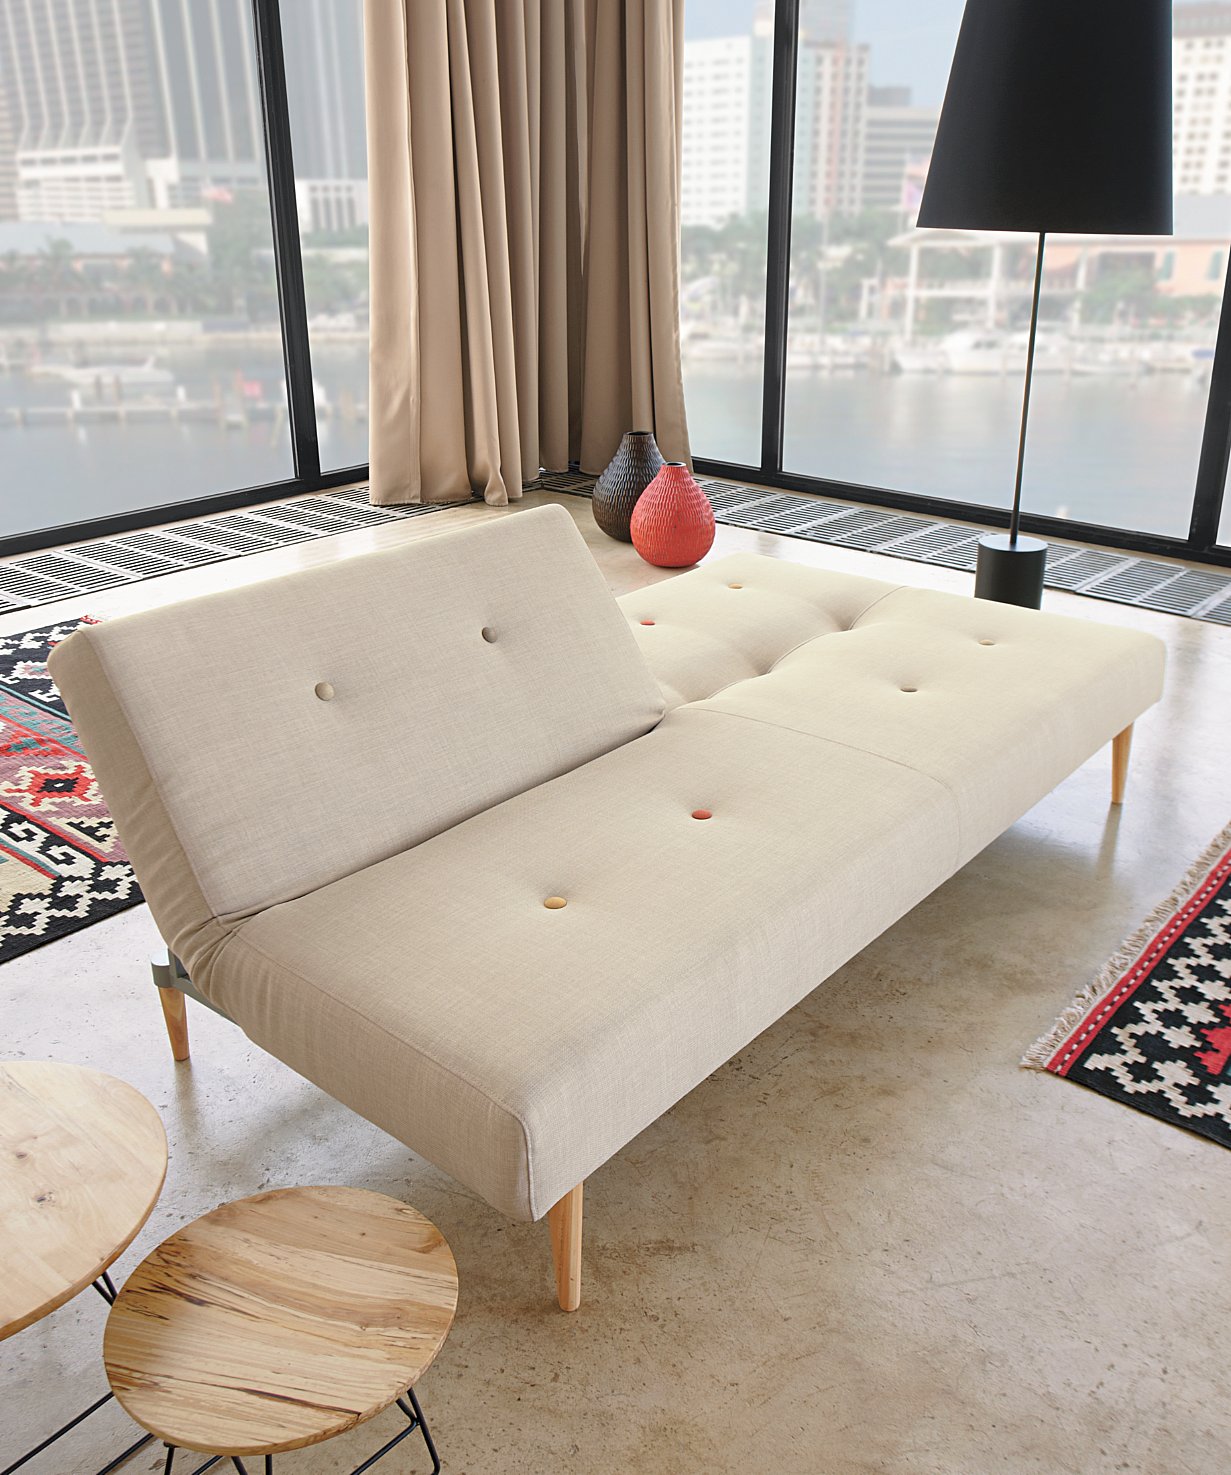 FIFTYNINE_SOFA_BED_01